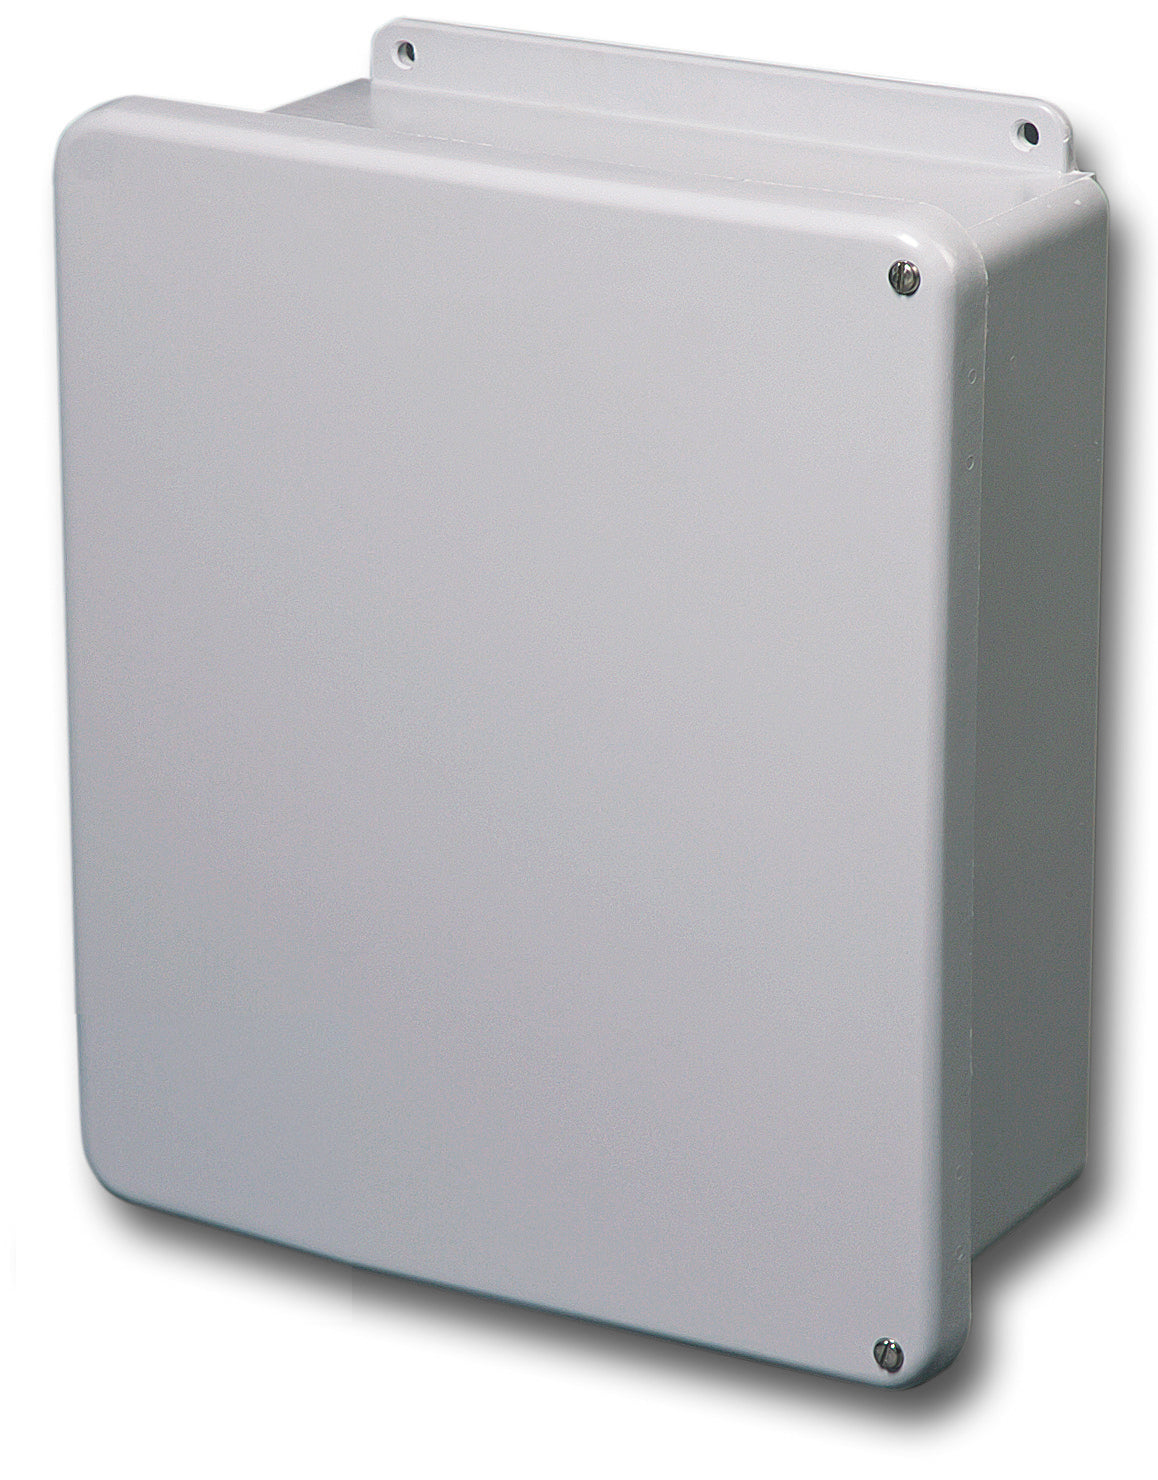 N4X   FG   CHSC Series     Fiberglass Enclosures Hinged with Screw Cover